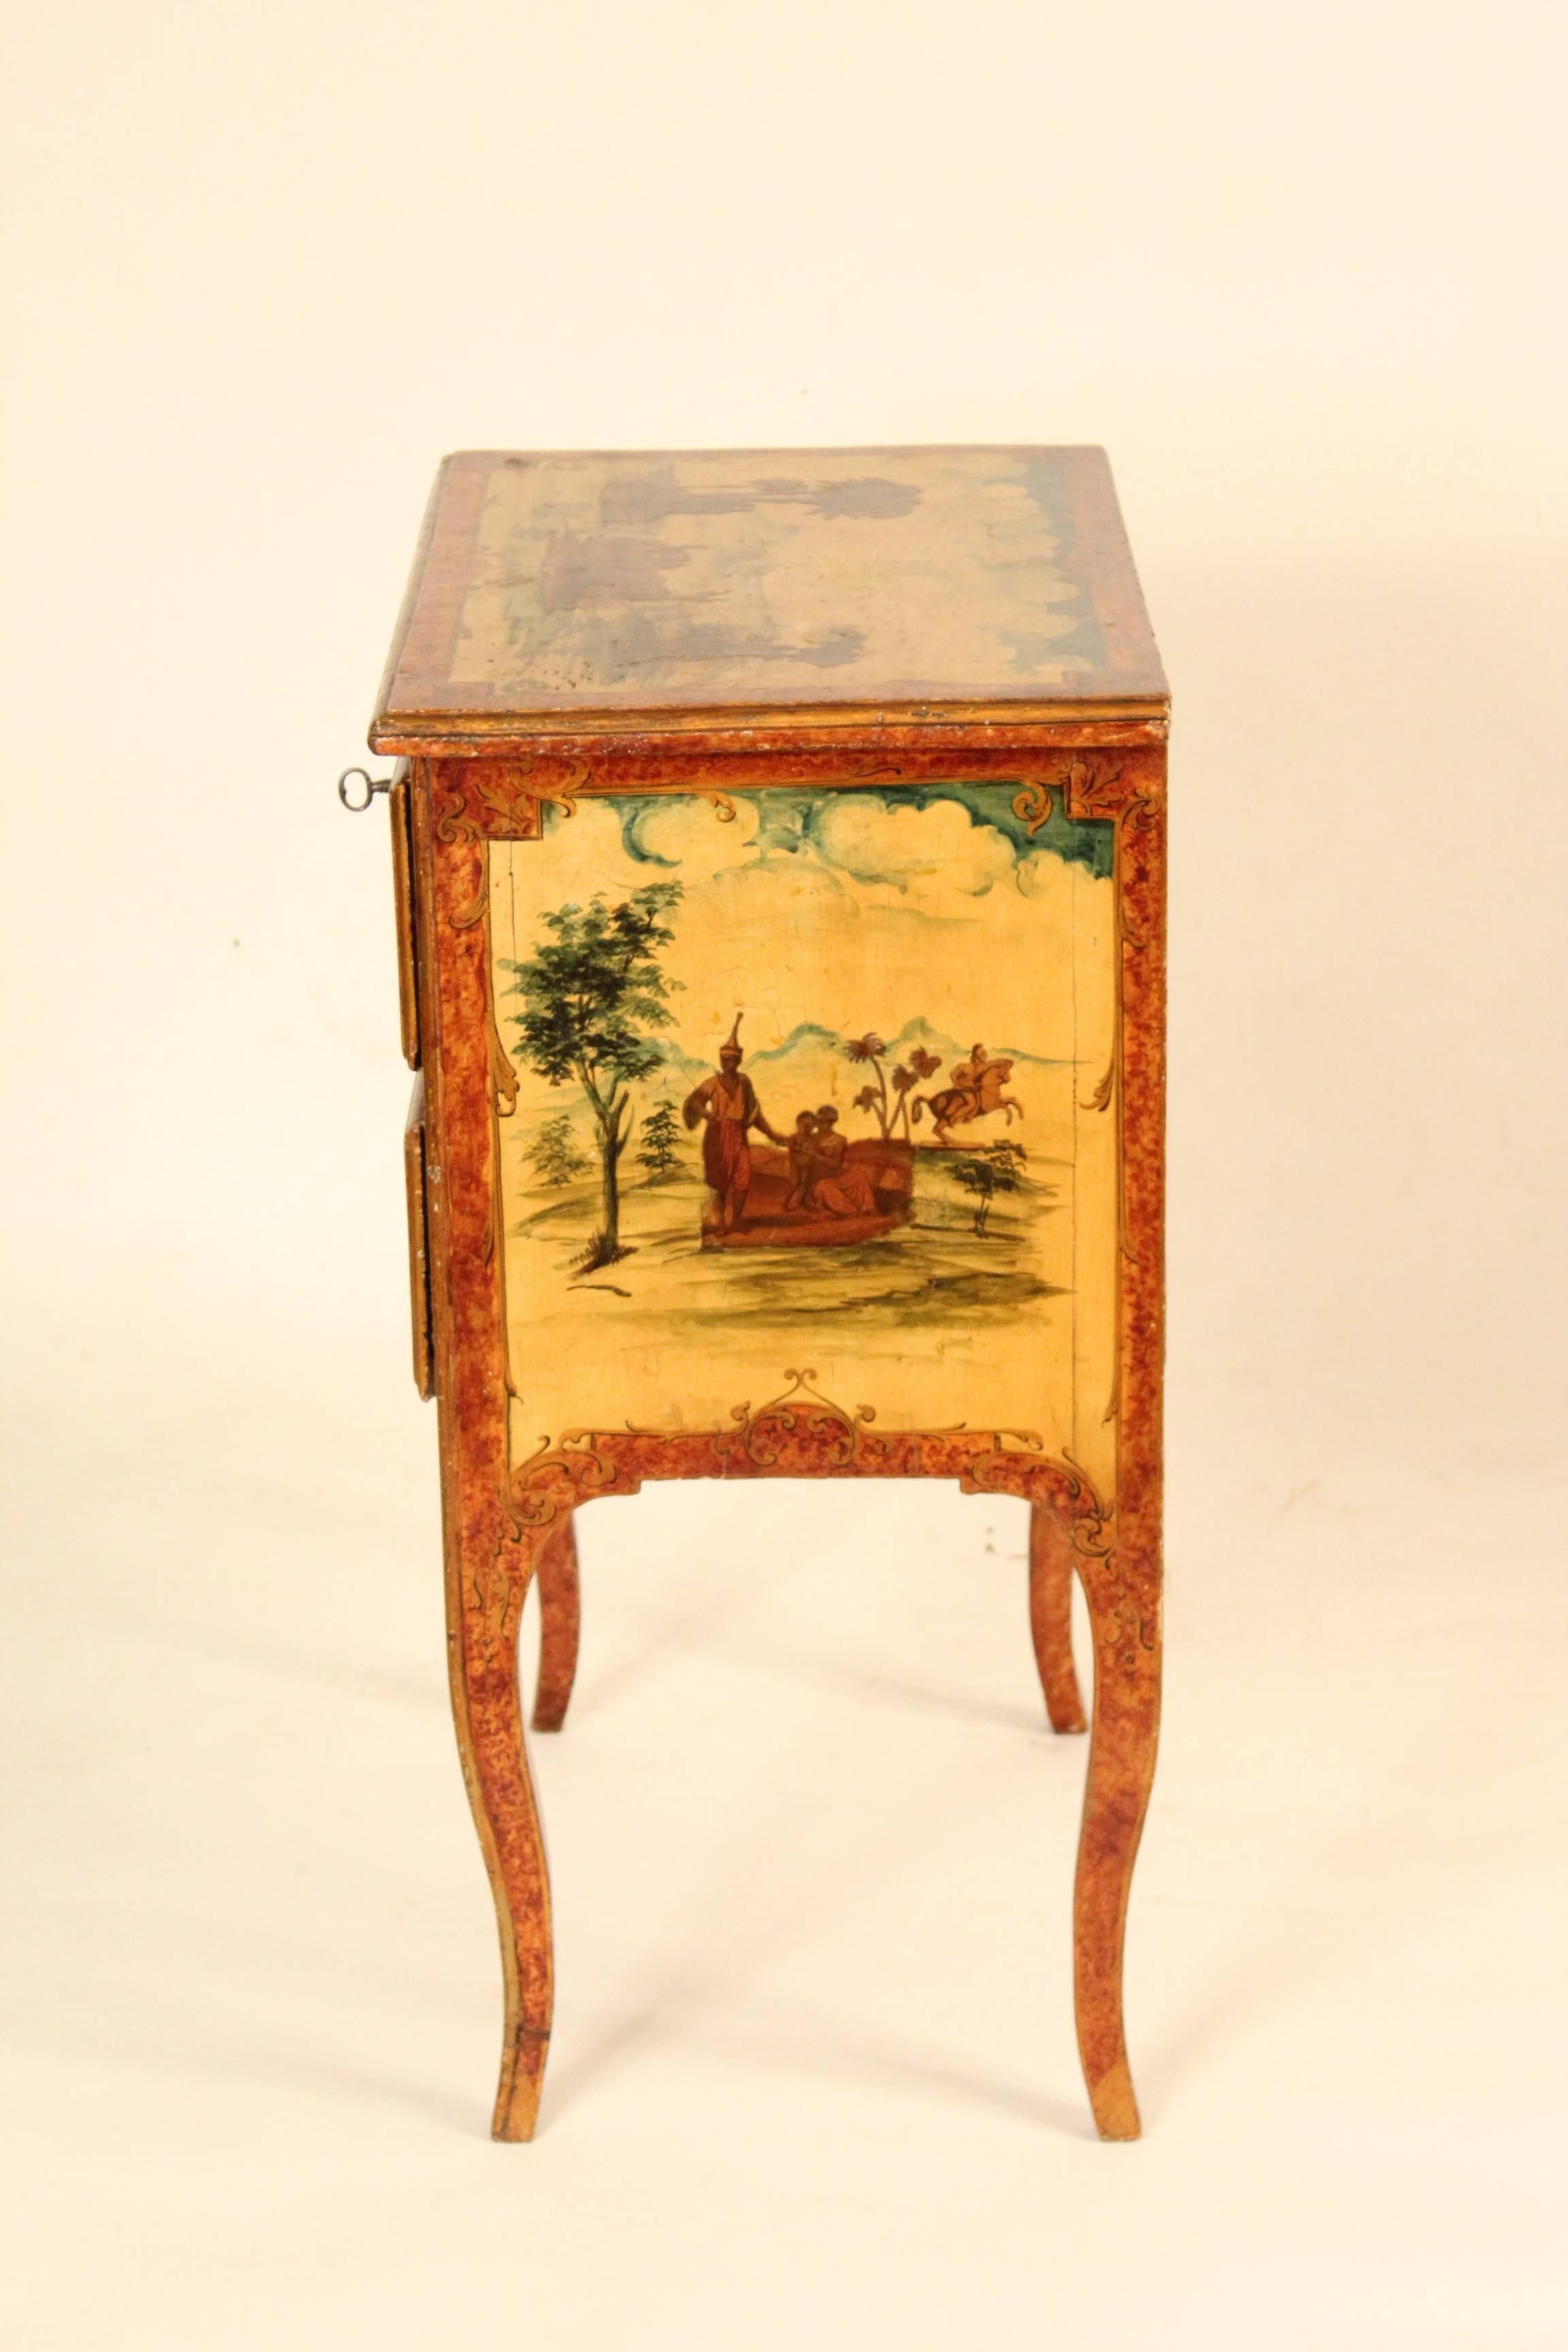 Italian Louis XV laca povera chest of drawers, 19th century. The design is printed on paper then applied to the chest of drawers and lacquered. The background is painted.